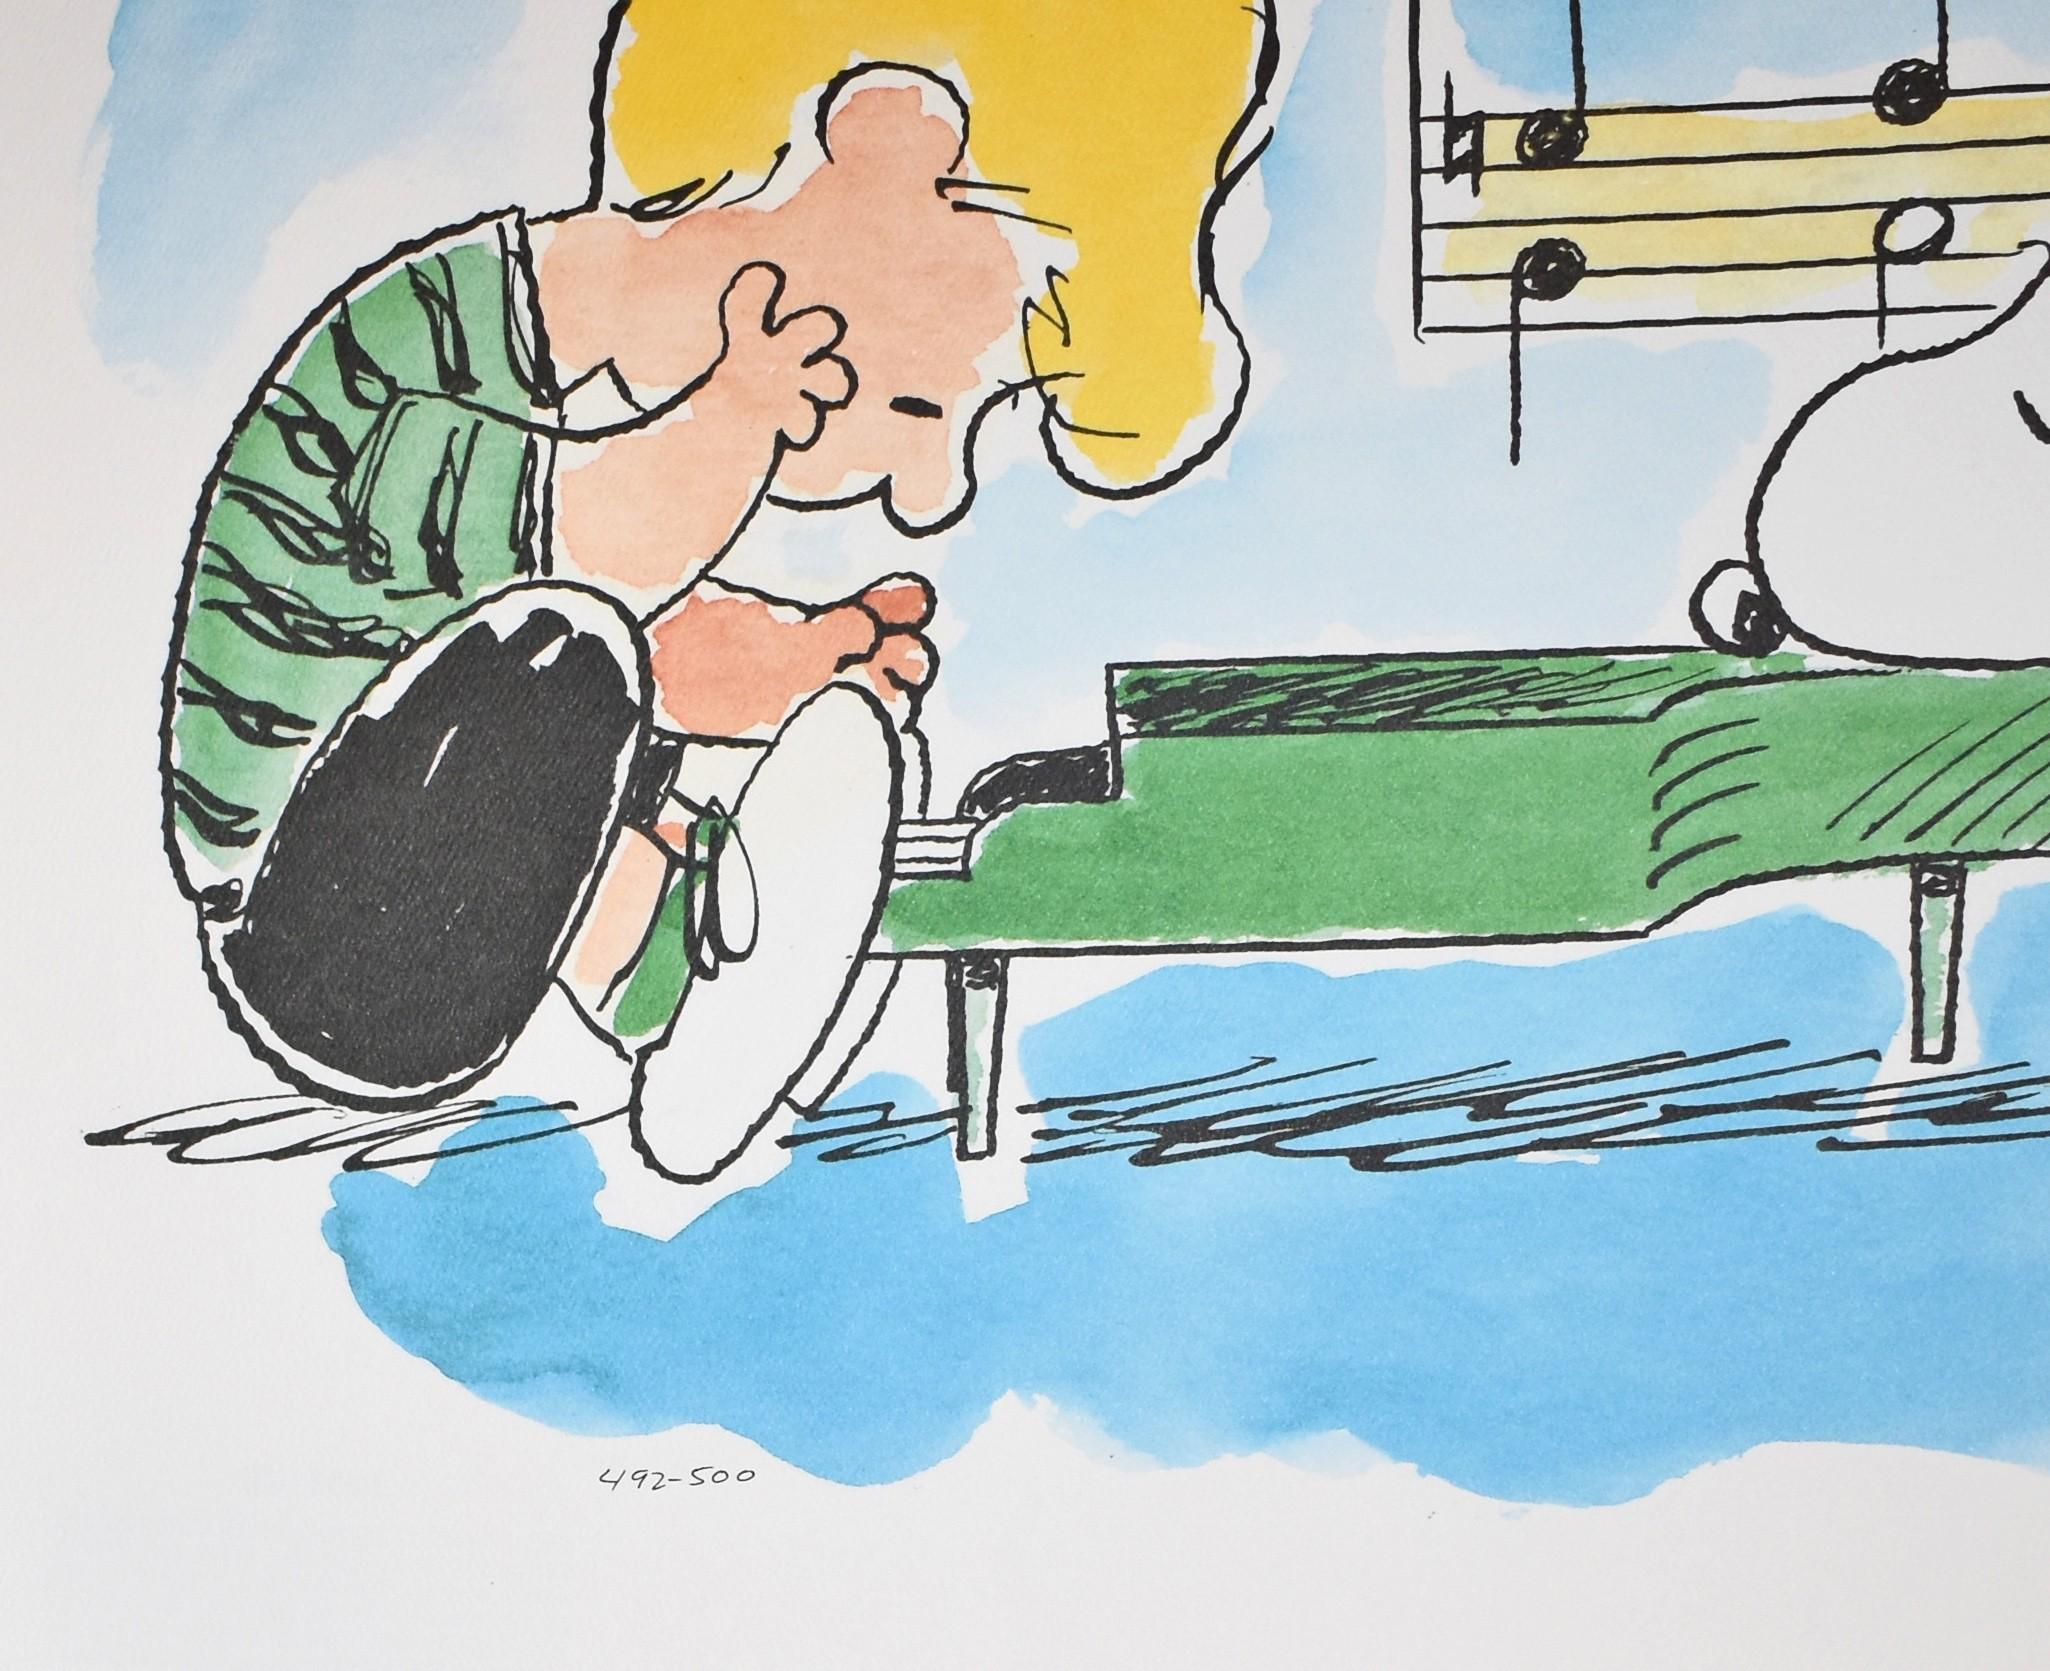 charles schulz signed lithograph